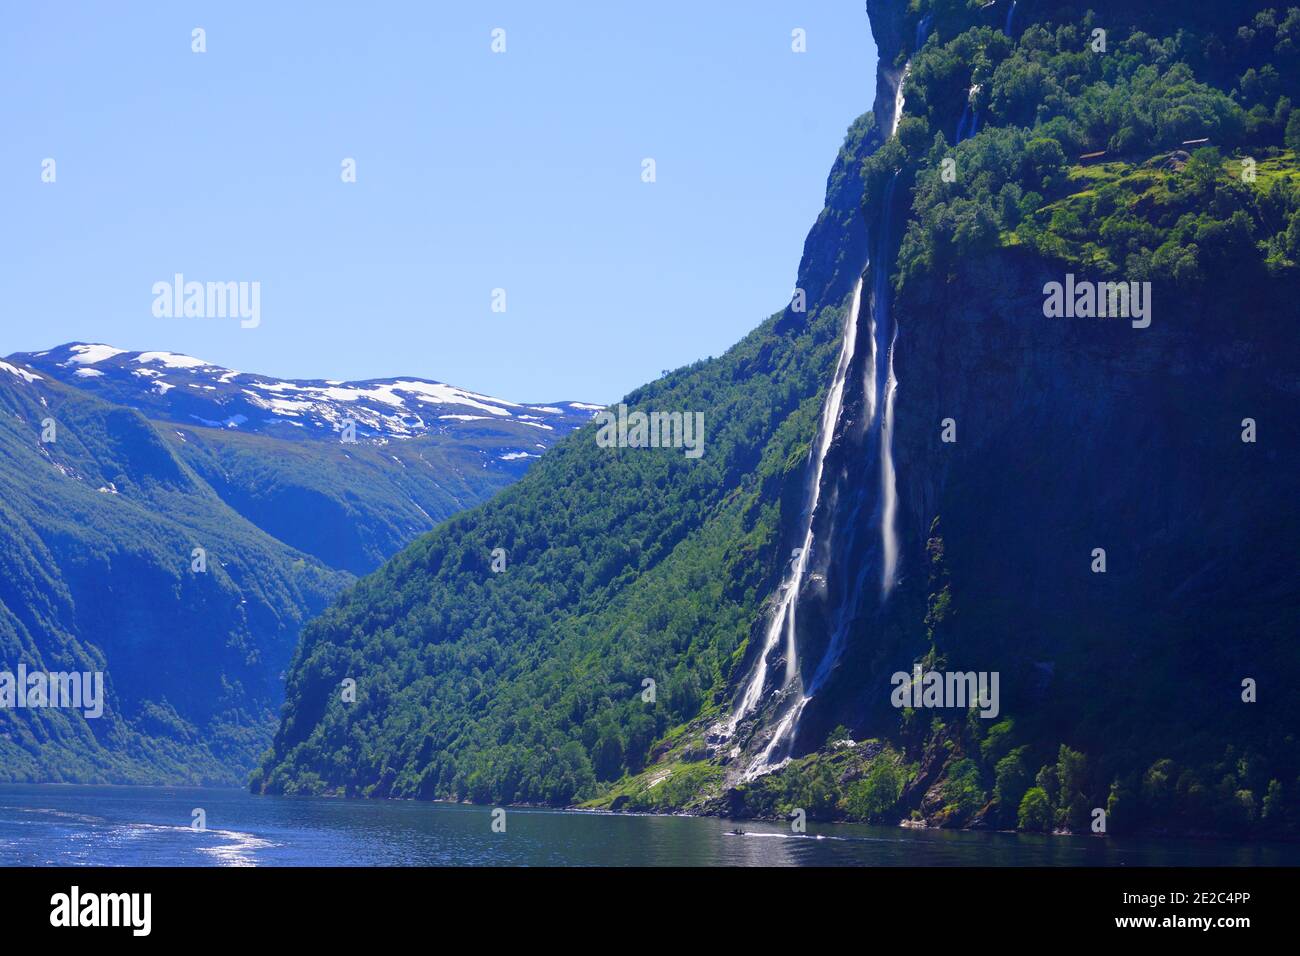 The amazing Seven Sisters waterfall in Geiranger, Norway. Stock Photo